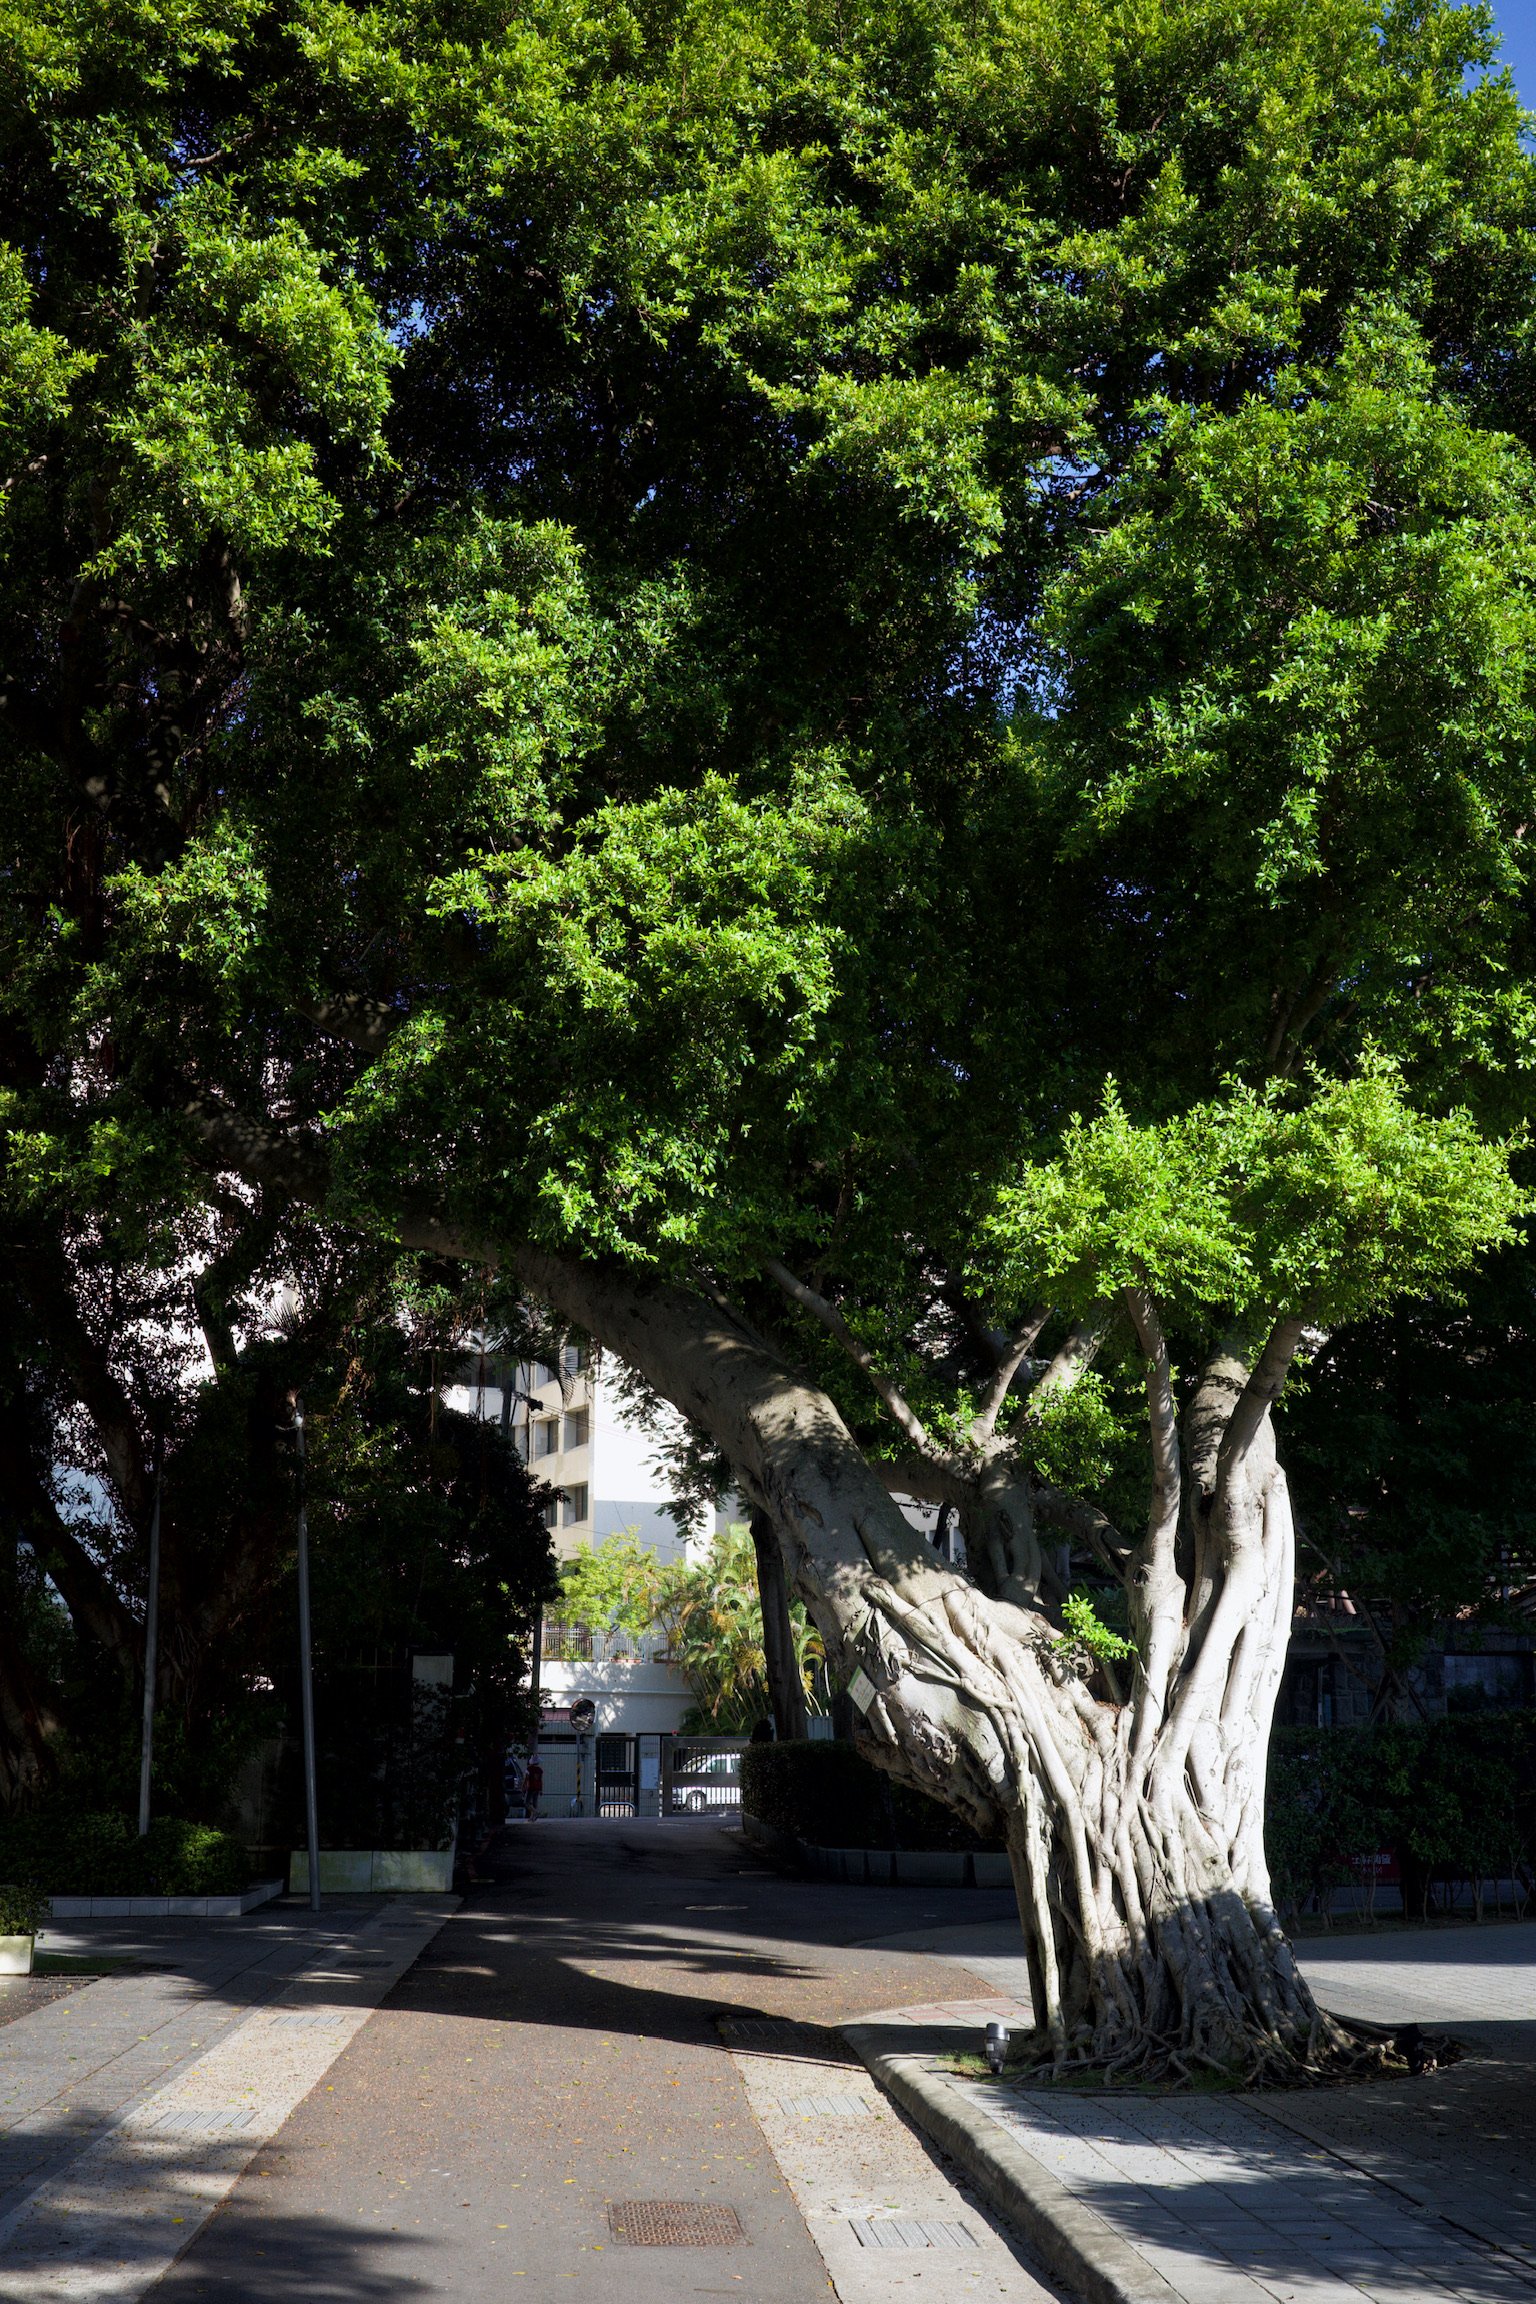 A giant Banyan tree stood on one side of a pavement with its branches extending and covering the top half of the photo.